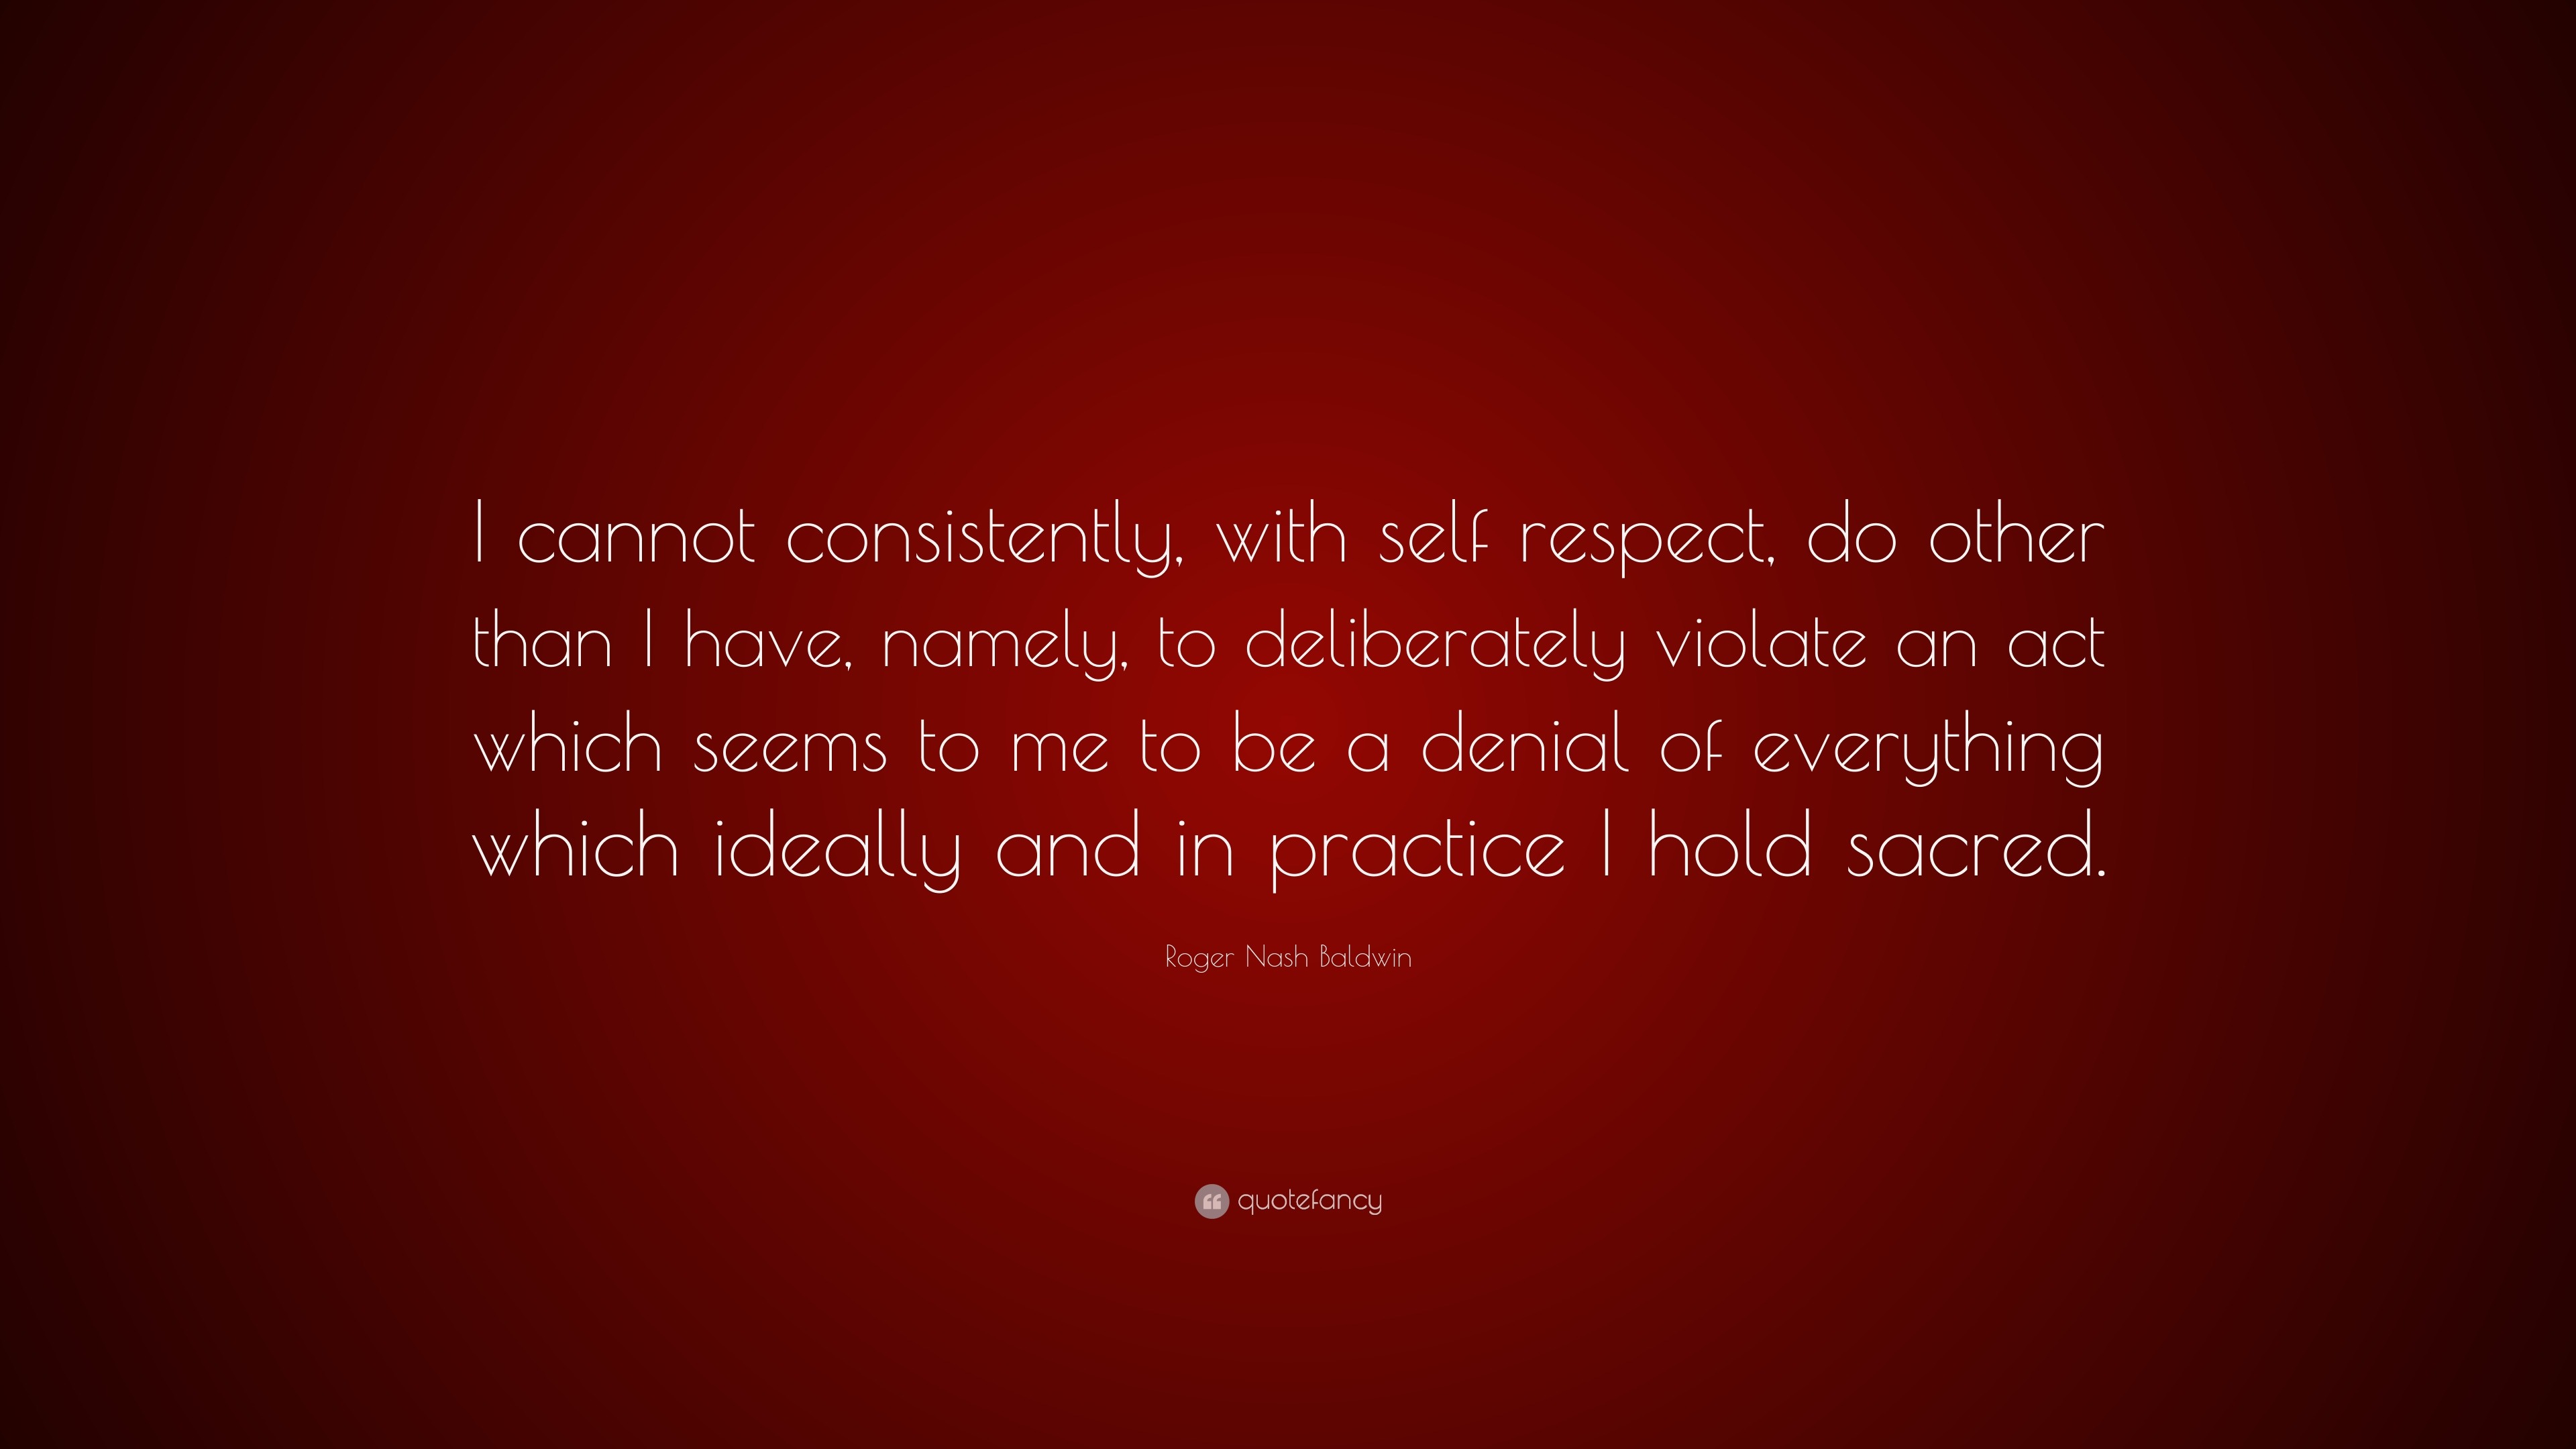 Roger Nash Baldwin Quote: “I cannot consistently, with self respect, do ...